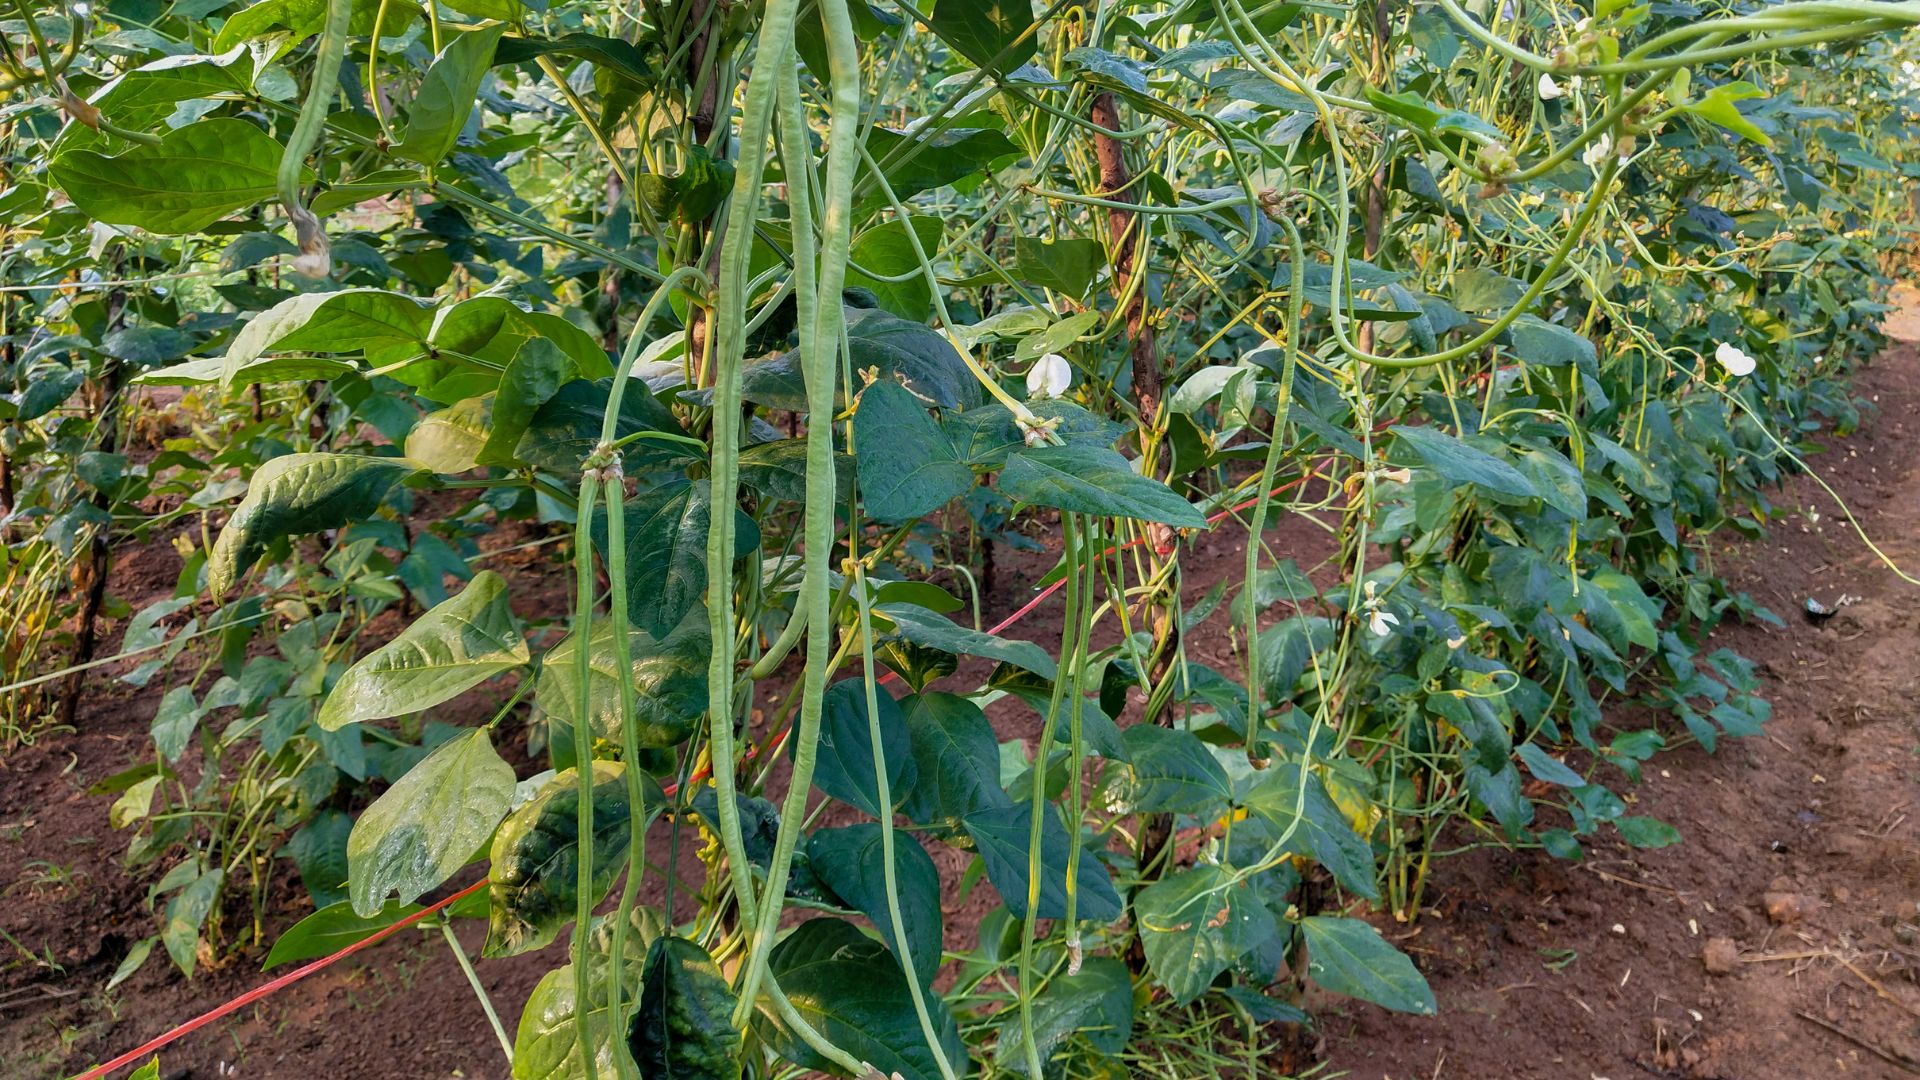 8 Steps For Growing Beans In Your Home Garden